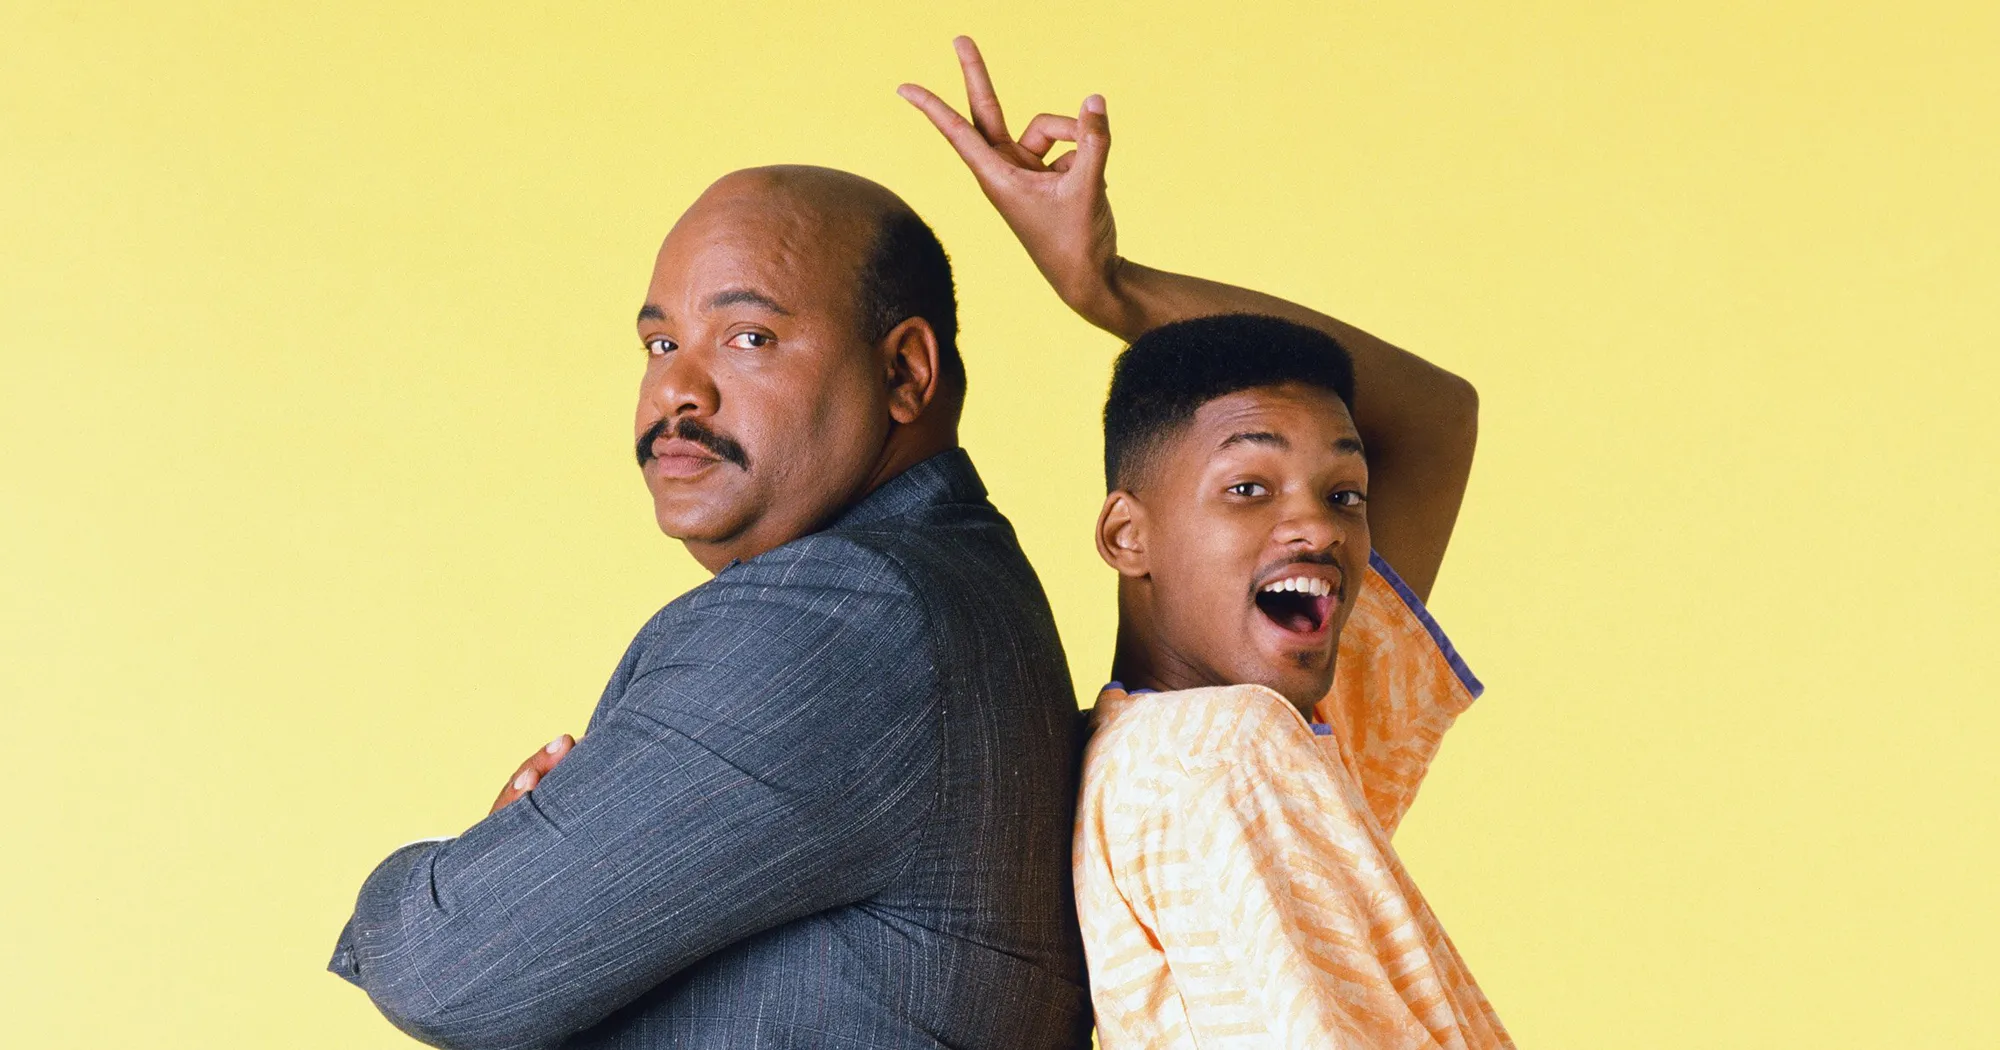 The Fresh Prince of Bel-Air Picture